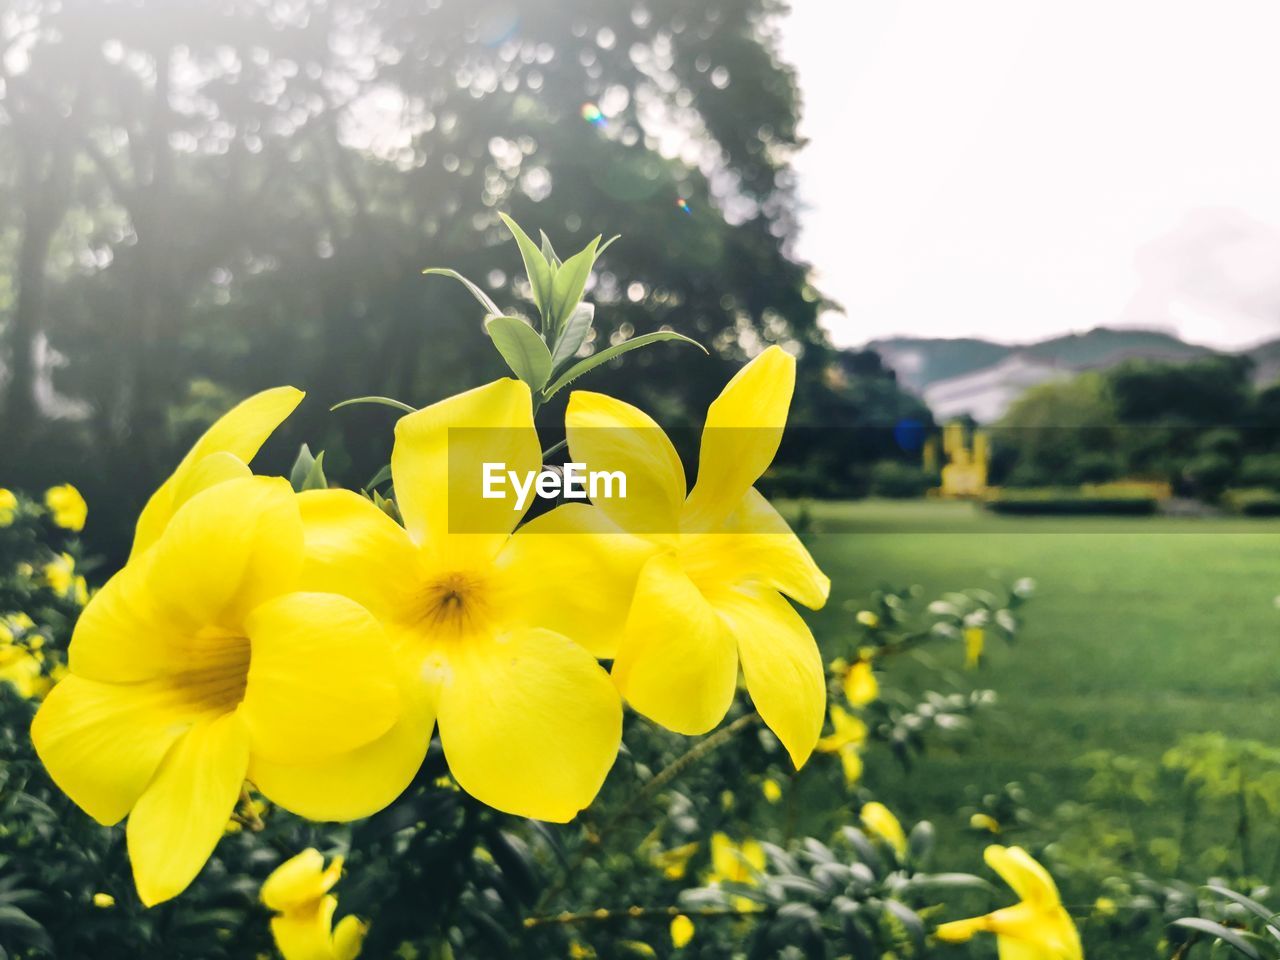 flower, flowering plant, plant, yellow, freshness, beauty in nature, nature, fragility, flower head, petal, growth, inflorescence, close-up, springtime, focus on foreground, blossom, no people, meadow, outdoors, daffodil, vibrant color, sky, sunlight, day, environment, landscape, tranquility, land, wildflower